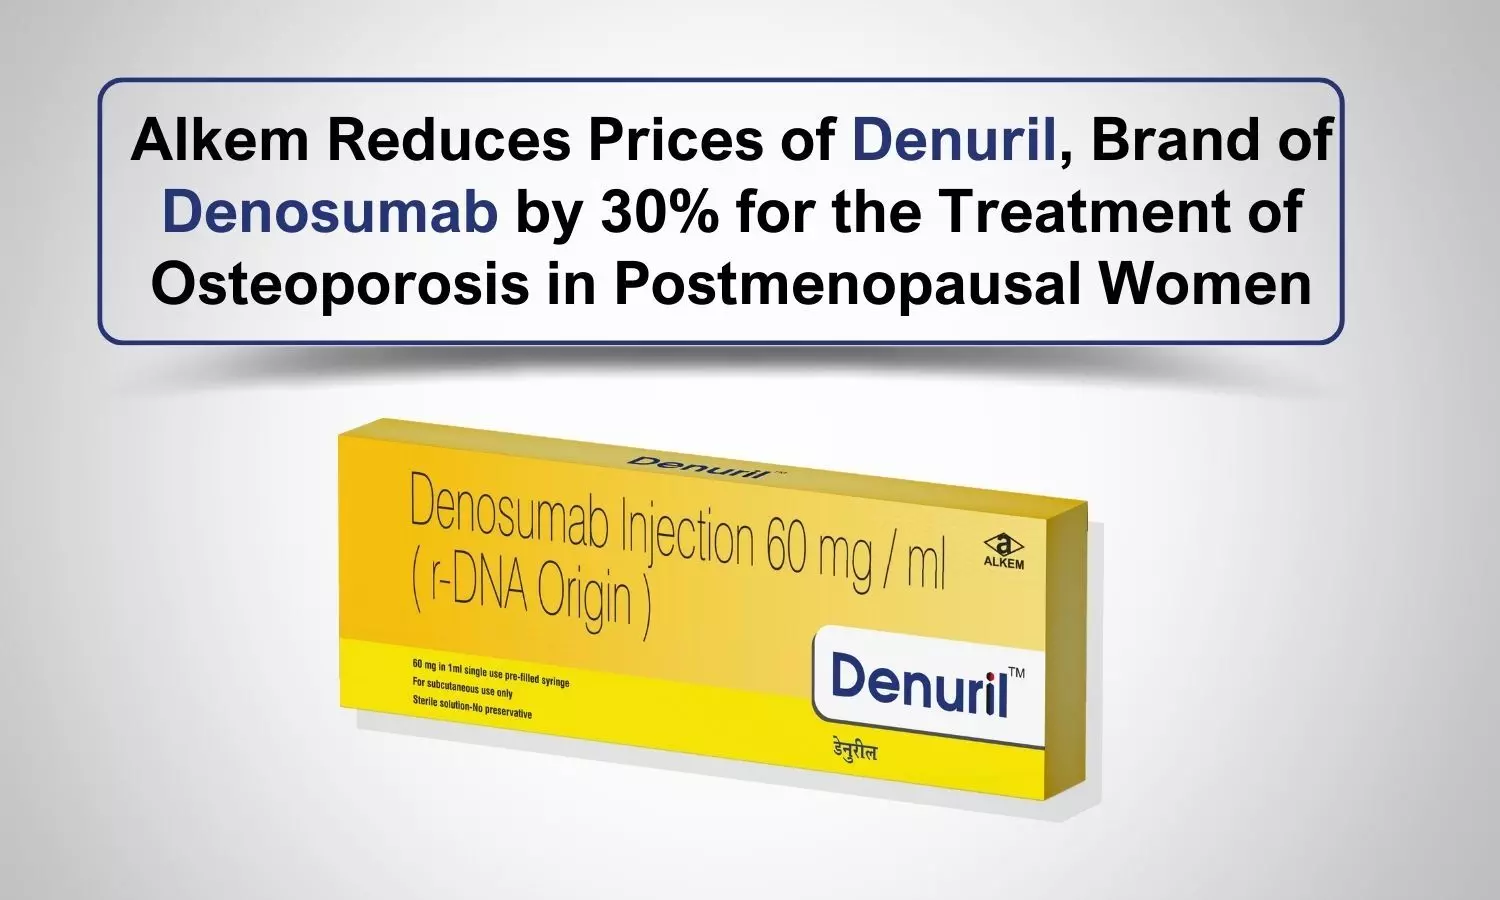 Alkem Reduces Prices of Denuril, Brand of Denosumab by 30% for the Treatment of Osteoporosis in Postmenopausal Women